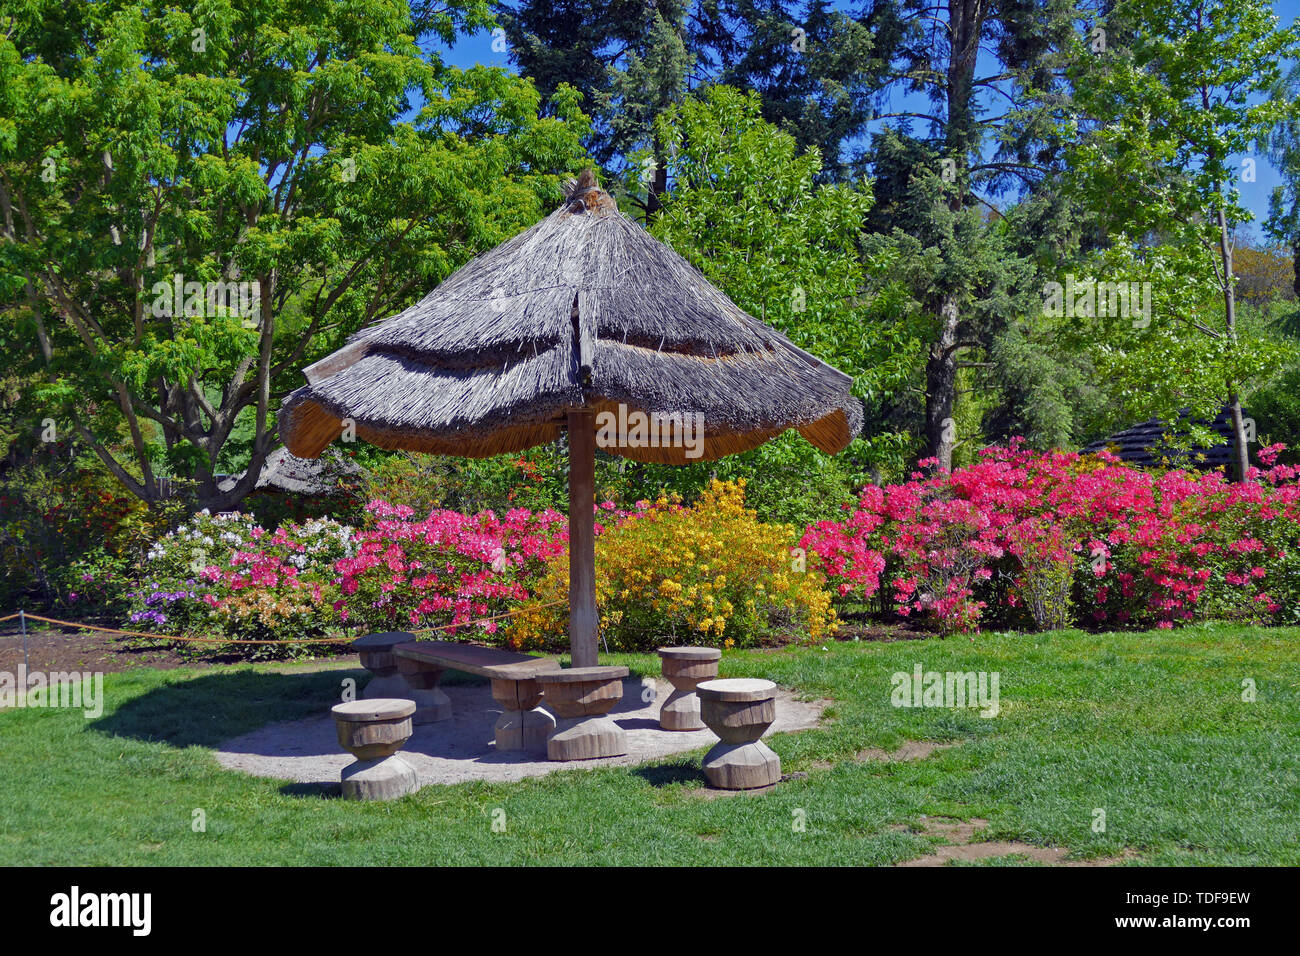 Seating with wooden chairs and parasol in flower garden garden Stock Photo